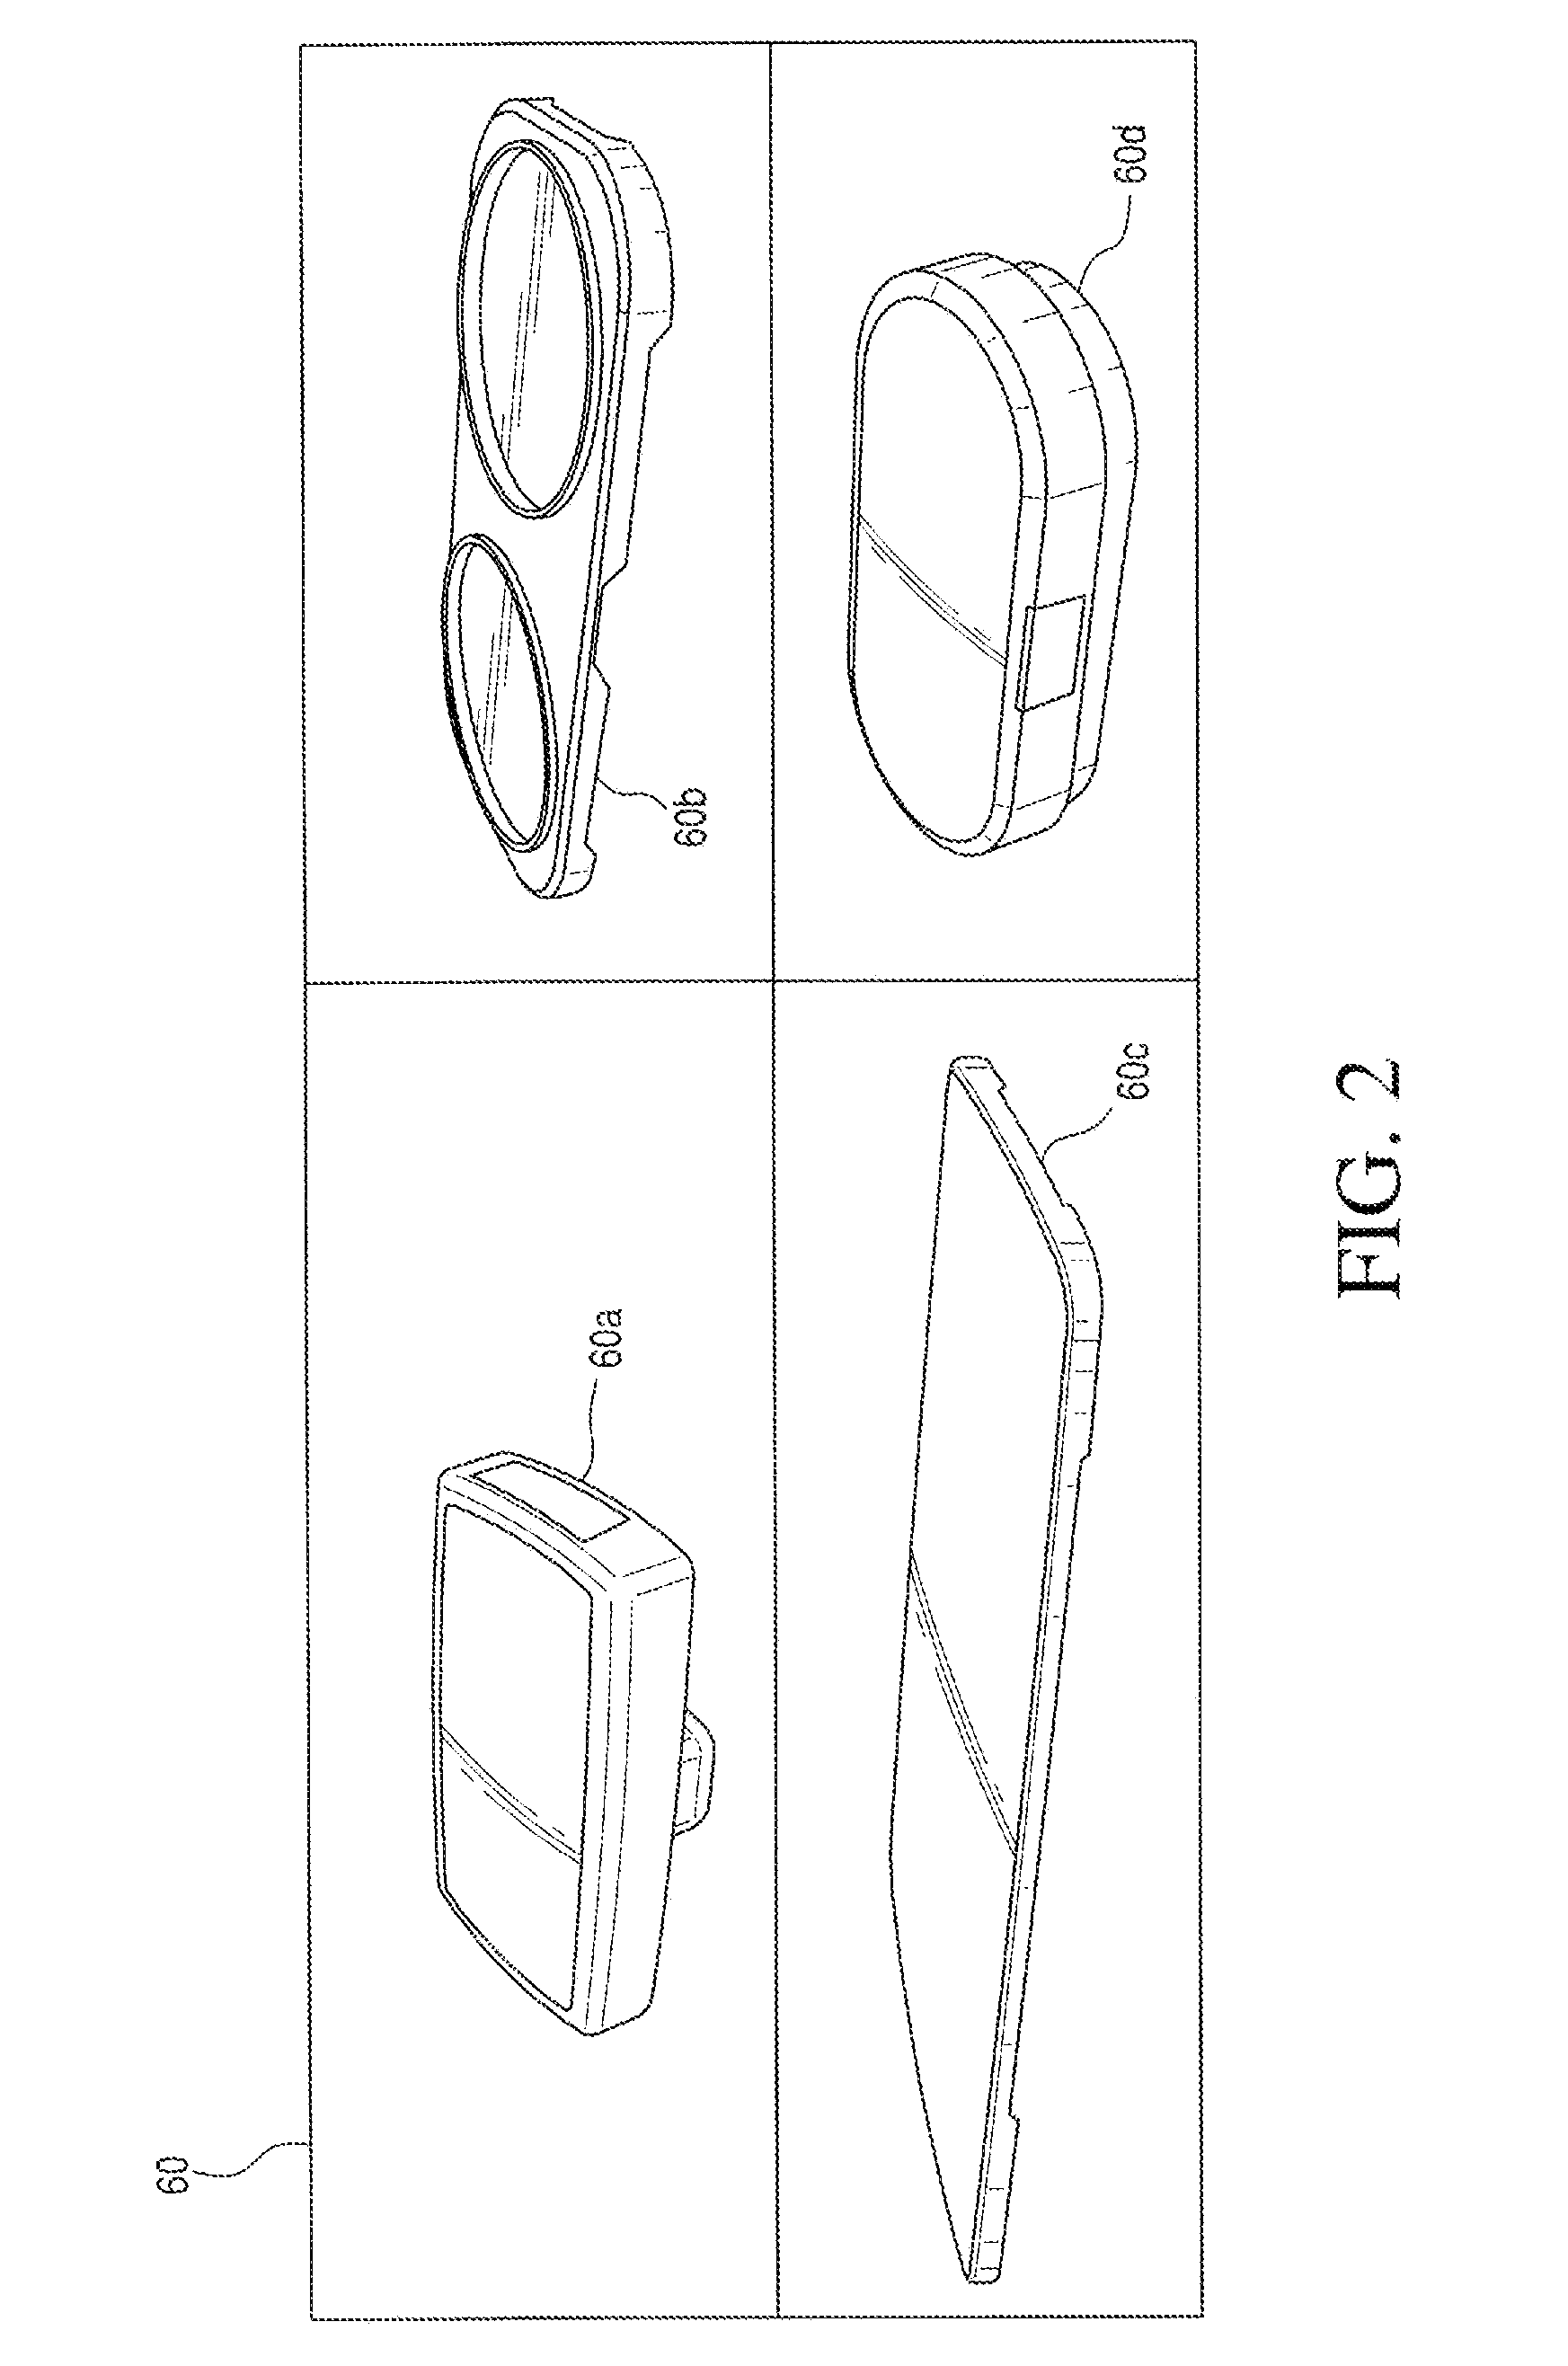 Systems and methods for providing animal health, nutrition, and/or wellness recommendations